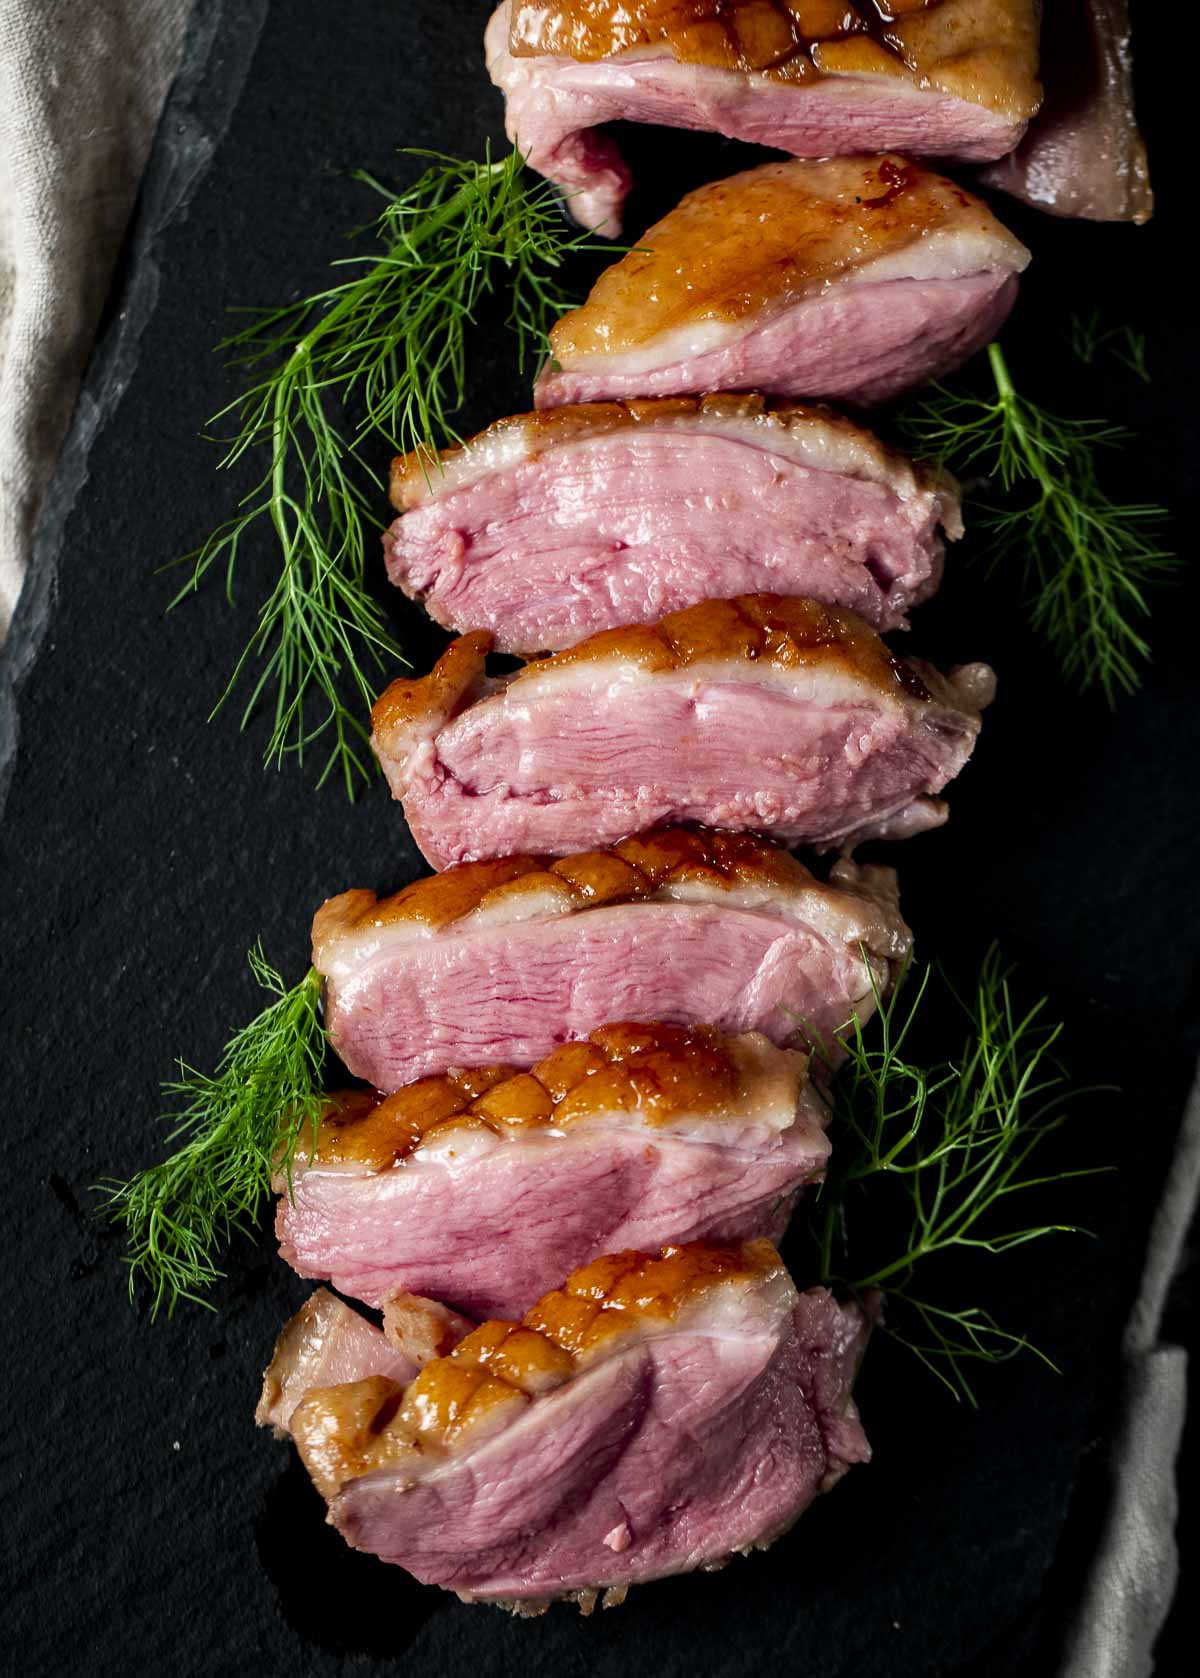 https://www.wenthere8this.com/wp-content/uploads/2021/05/sous-vide-duck-breast-7.jpg